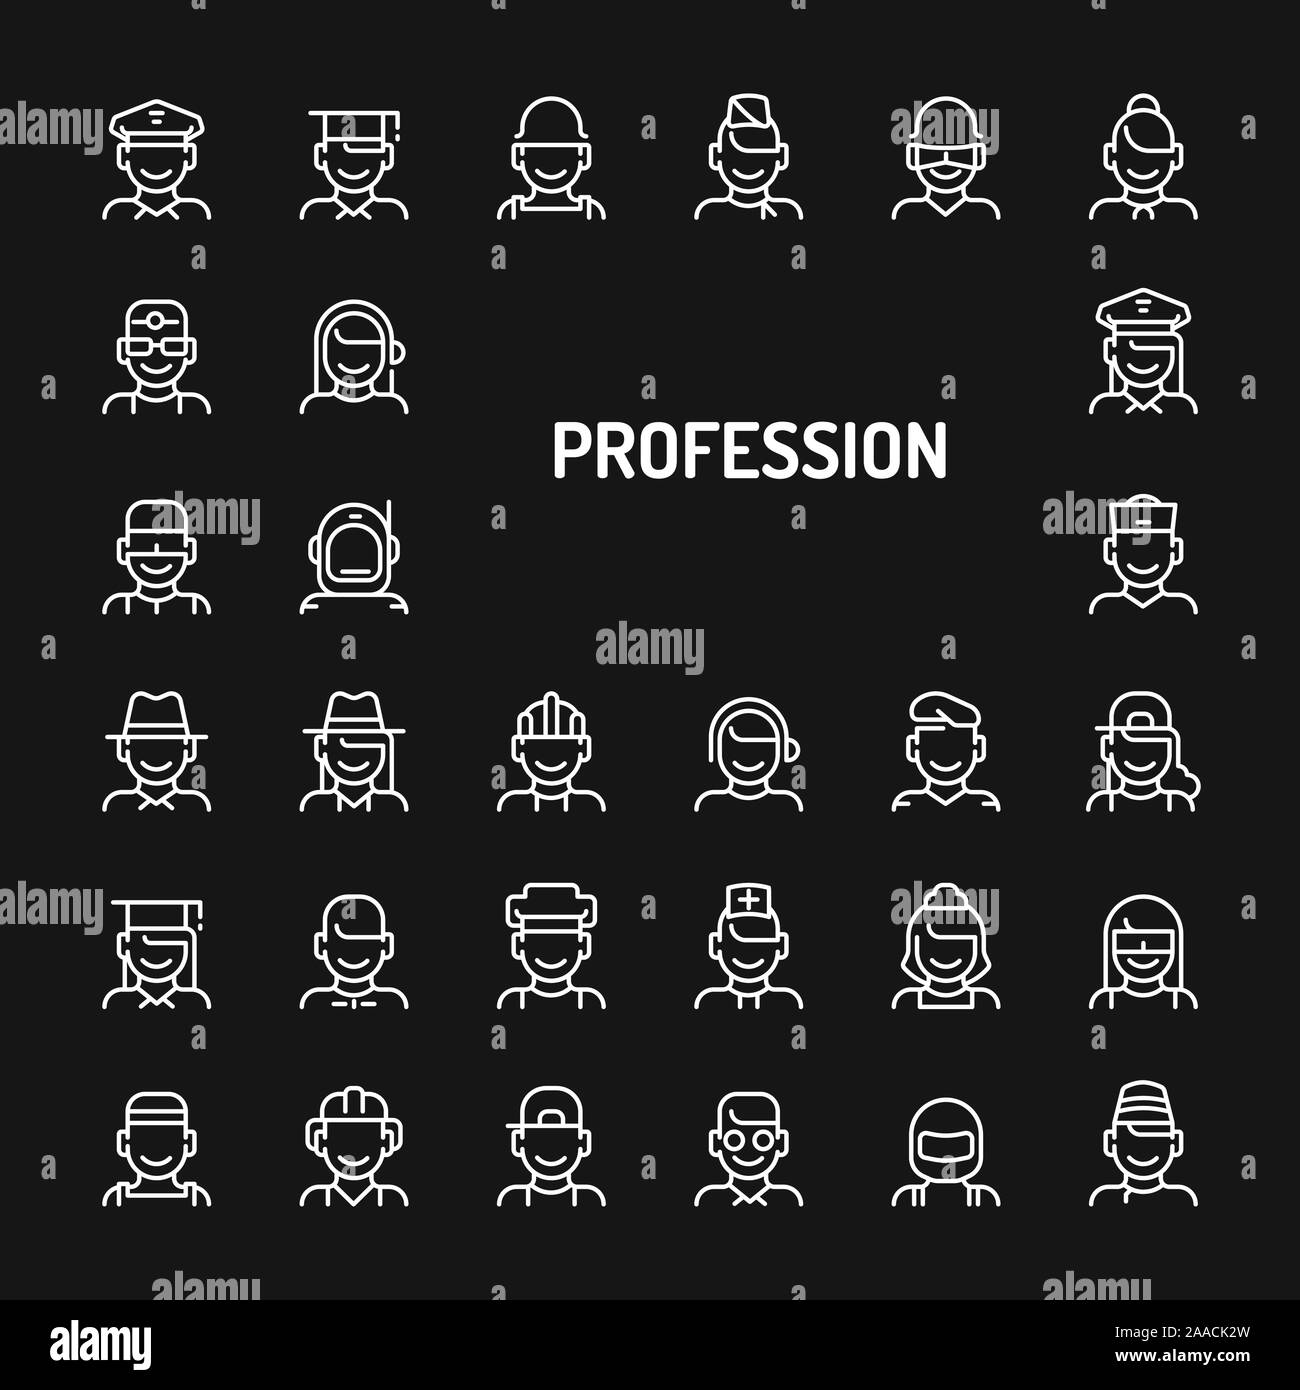 Simple white line icons isolated over black background related to professions, occupations & employments. Vector signs and symbols collections for web Stock Vector